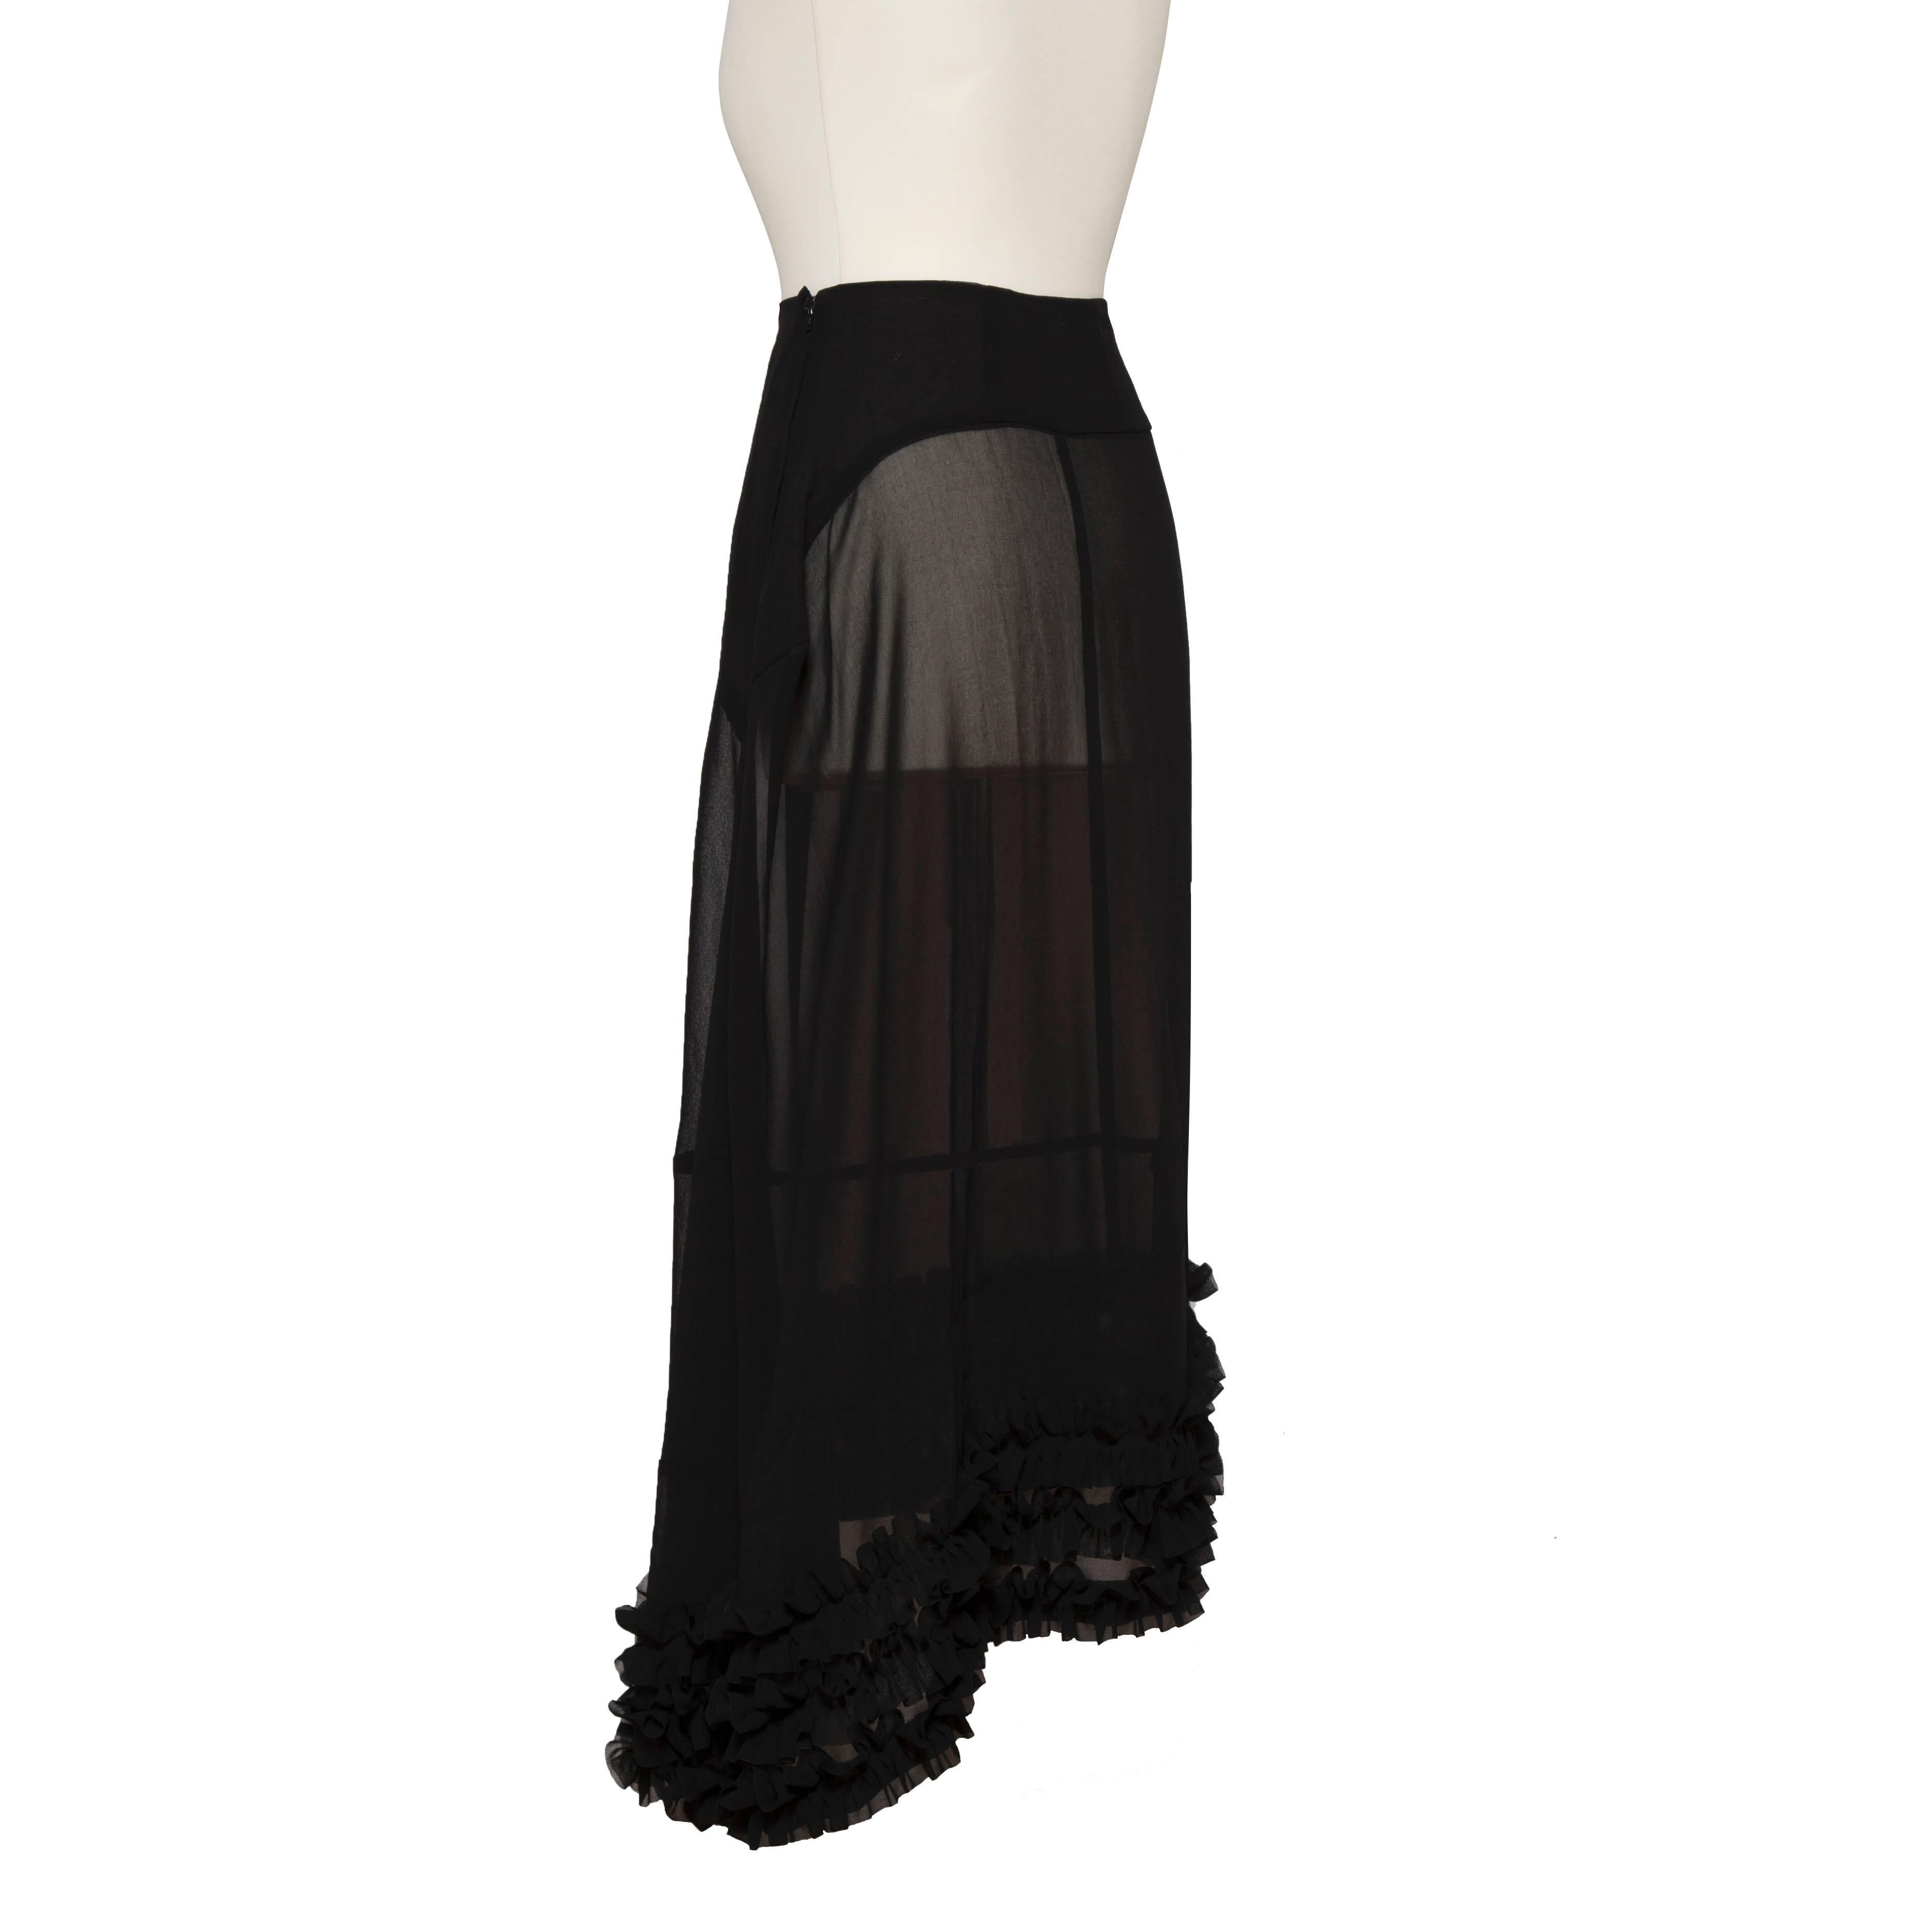 Comme des Garcons Ruffle Black Sheer Skirt AD1998 In Excellent Condition For Sale In Berlin, DE